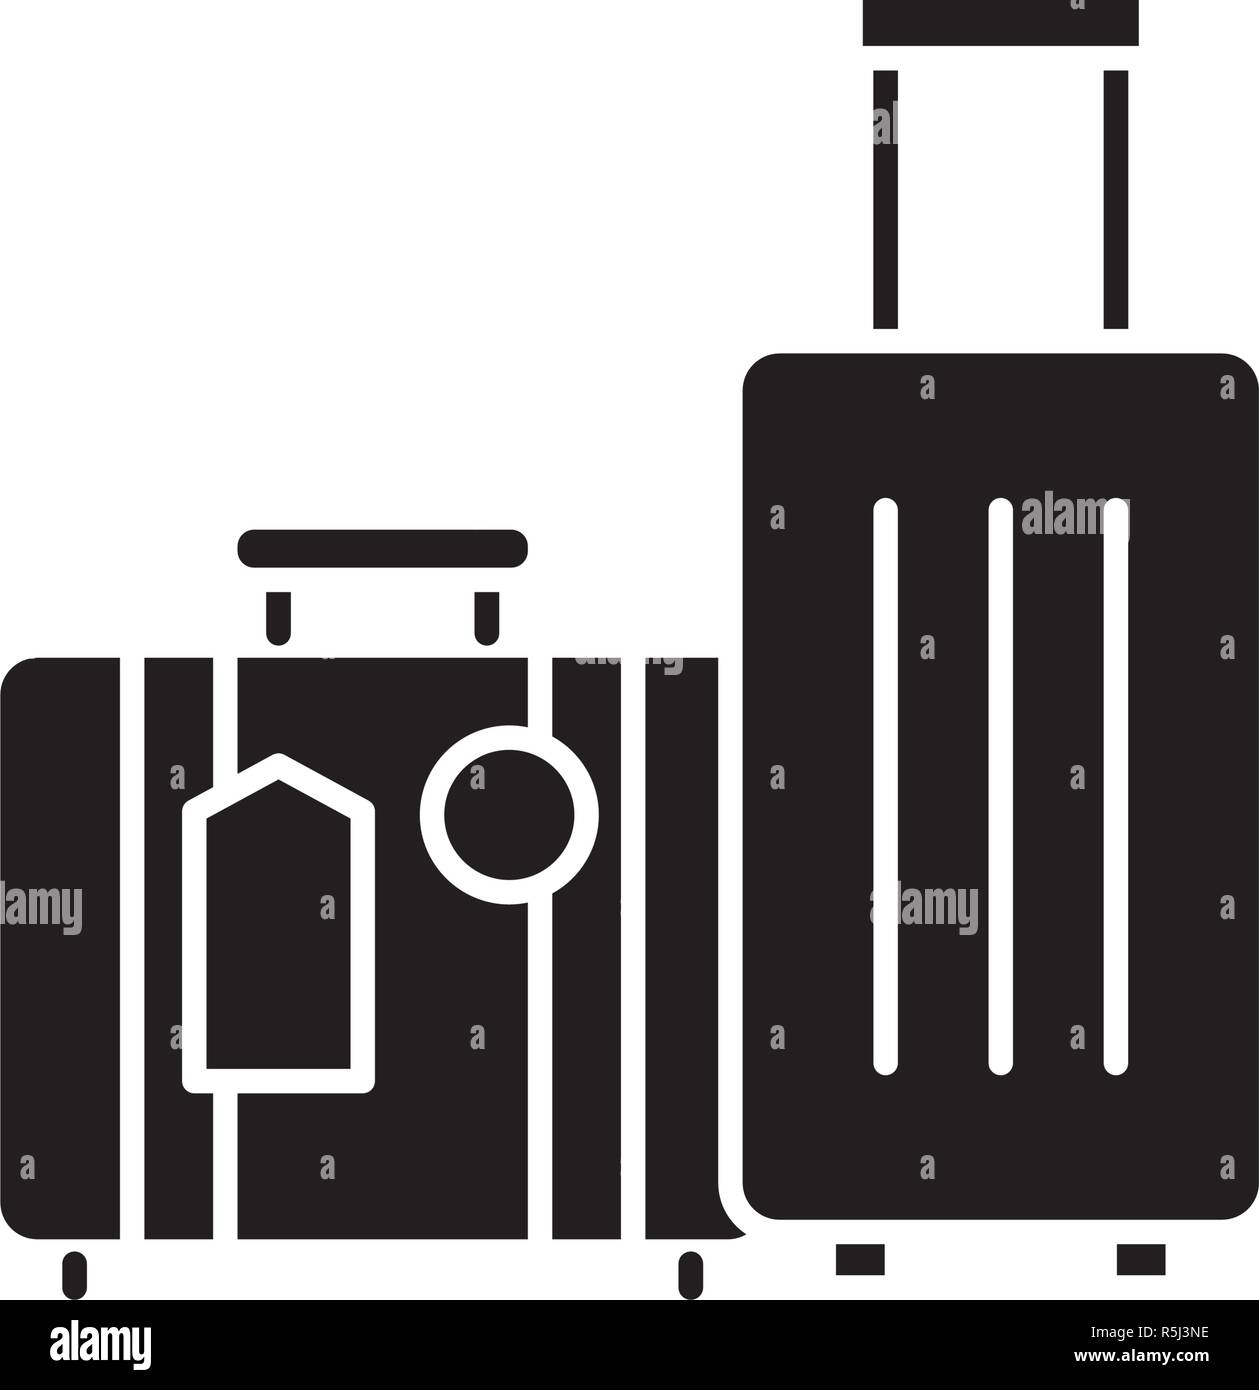 Travel luggage black icon, vector sign on isolated background. Travel luggage concept symbol, illustration  Stock Vector